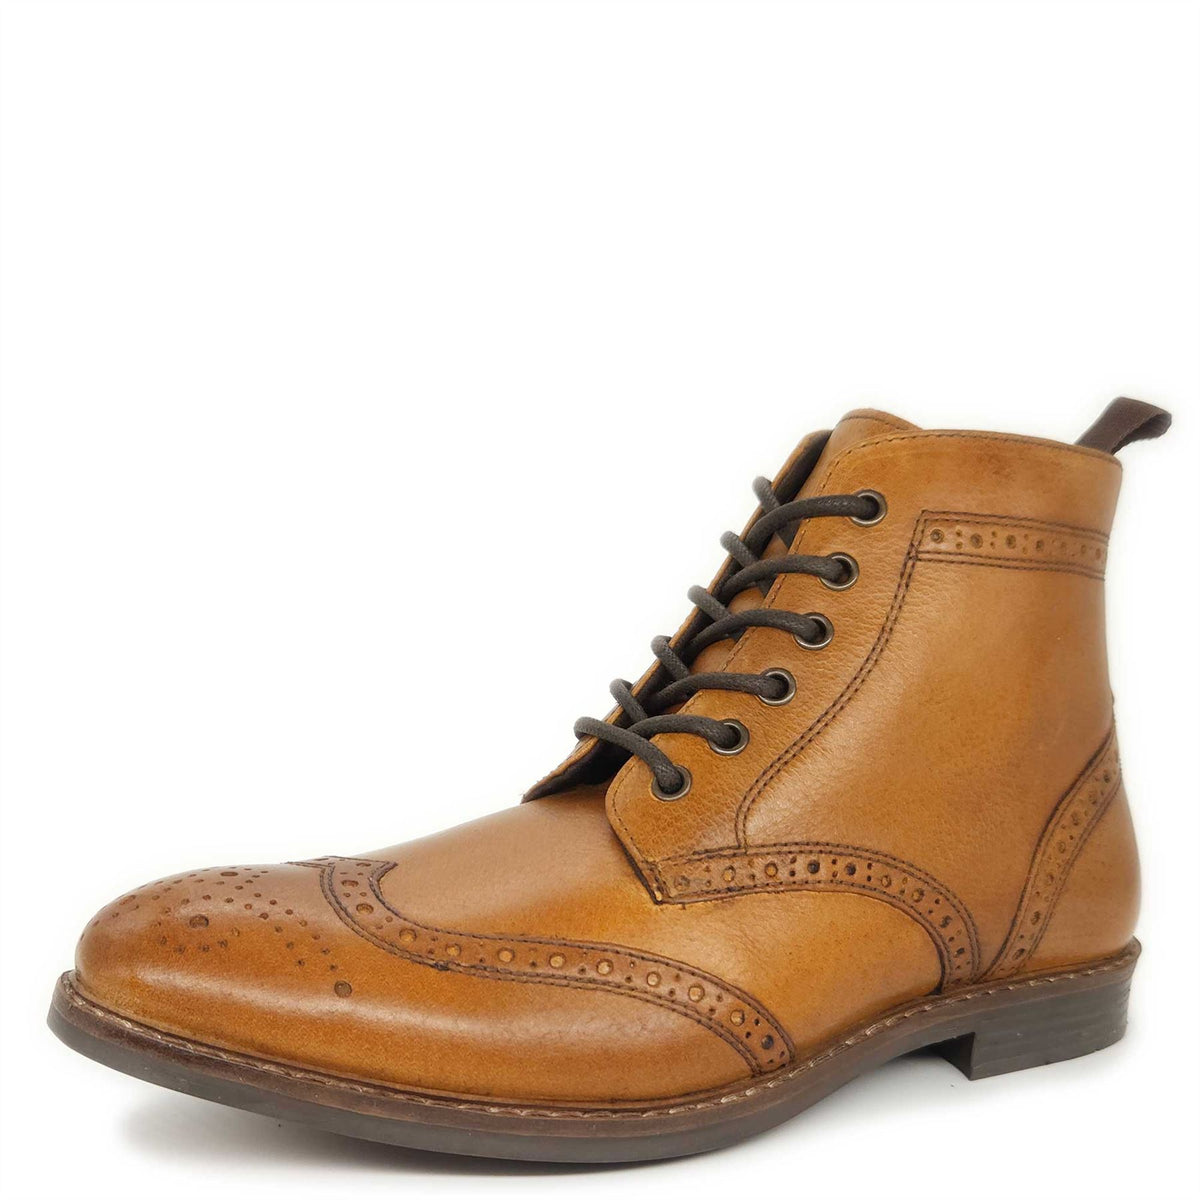 Red Tape Crick Glaven Men's Leather Lace Up Brogue Boots